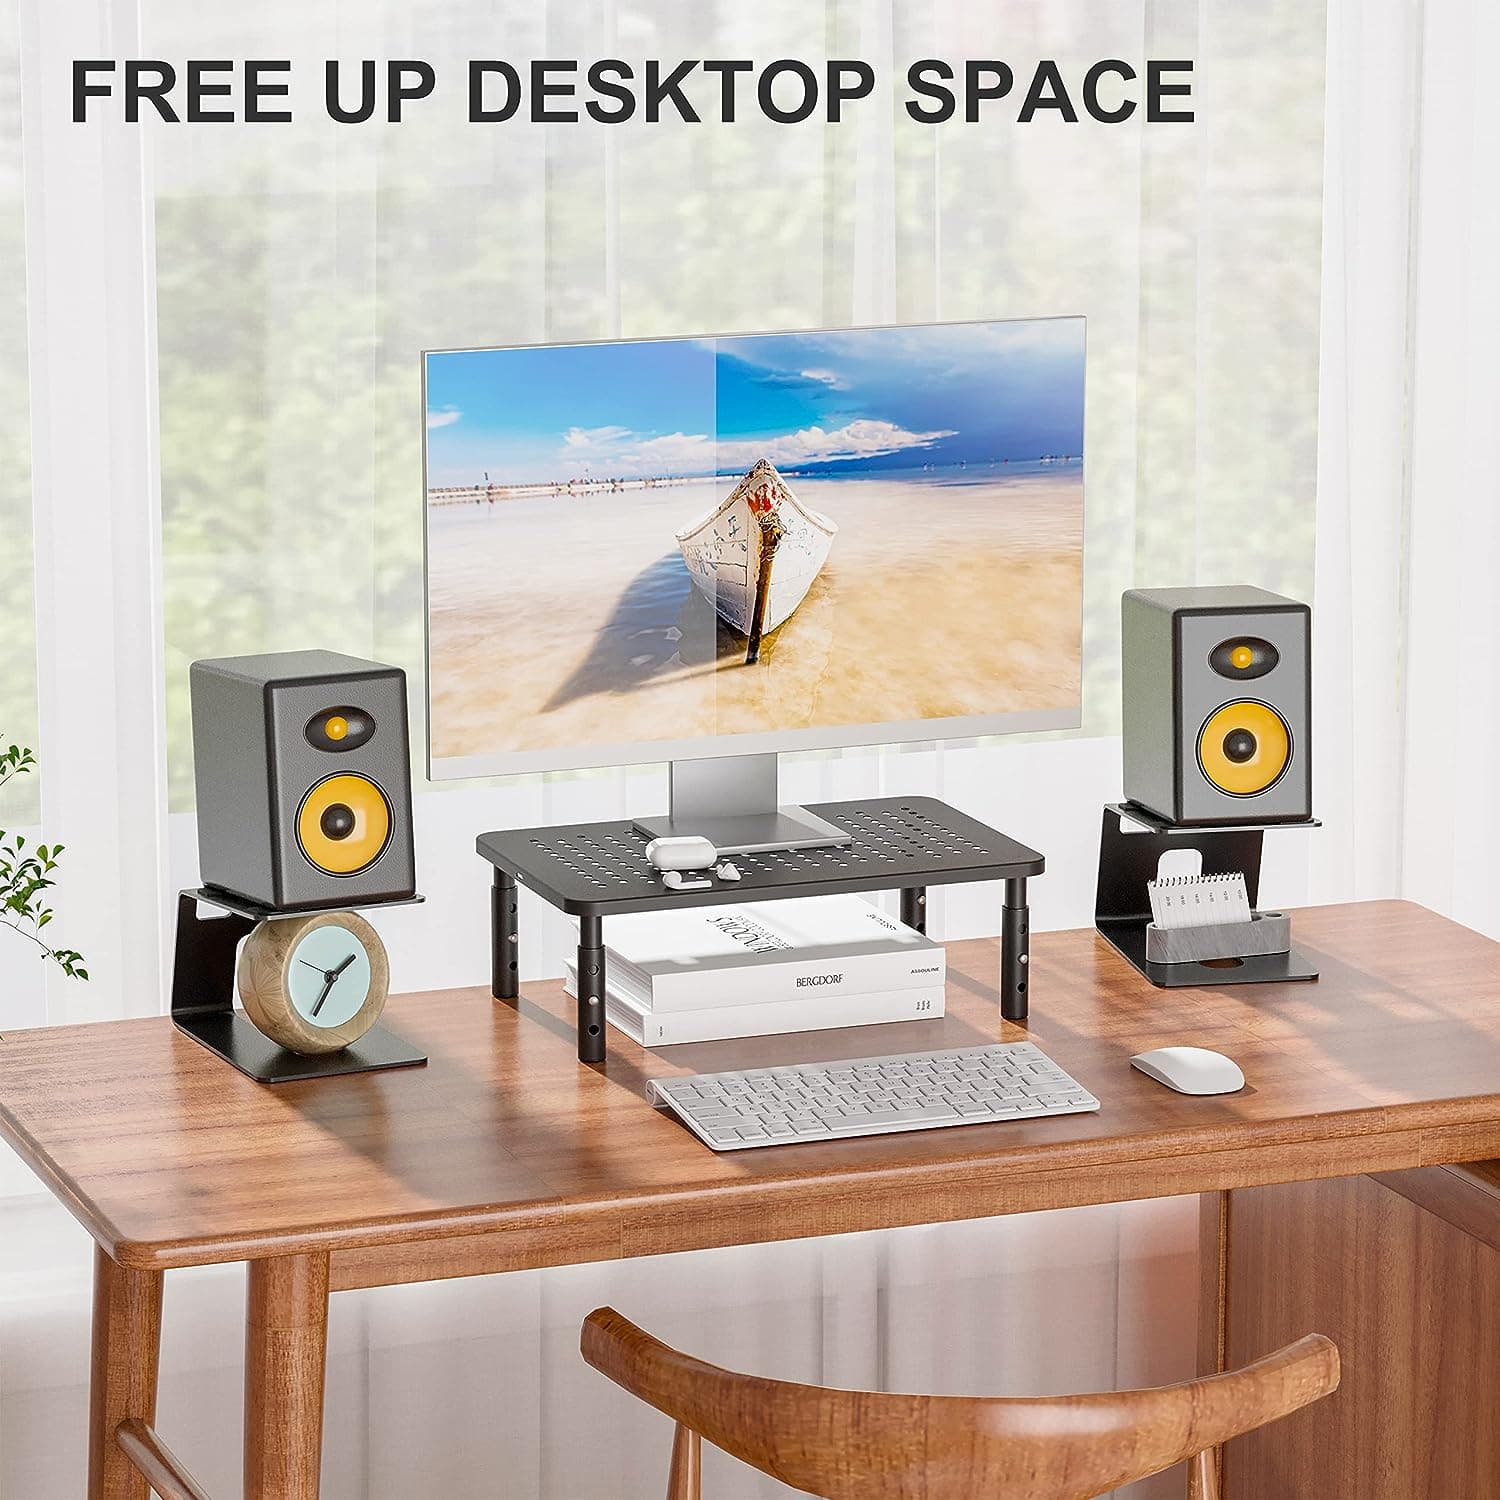 Pair Desktop Speaker Stand with Vibration Absorption Pad